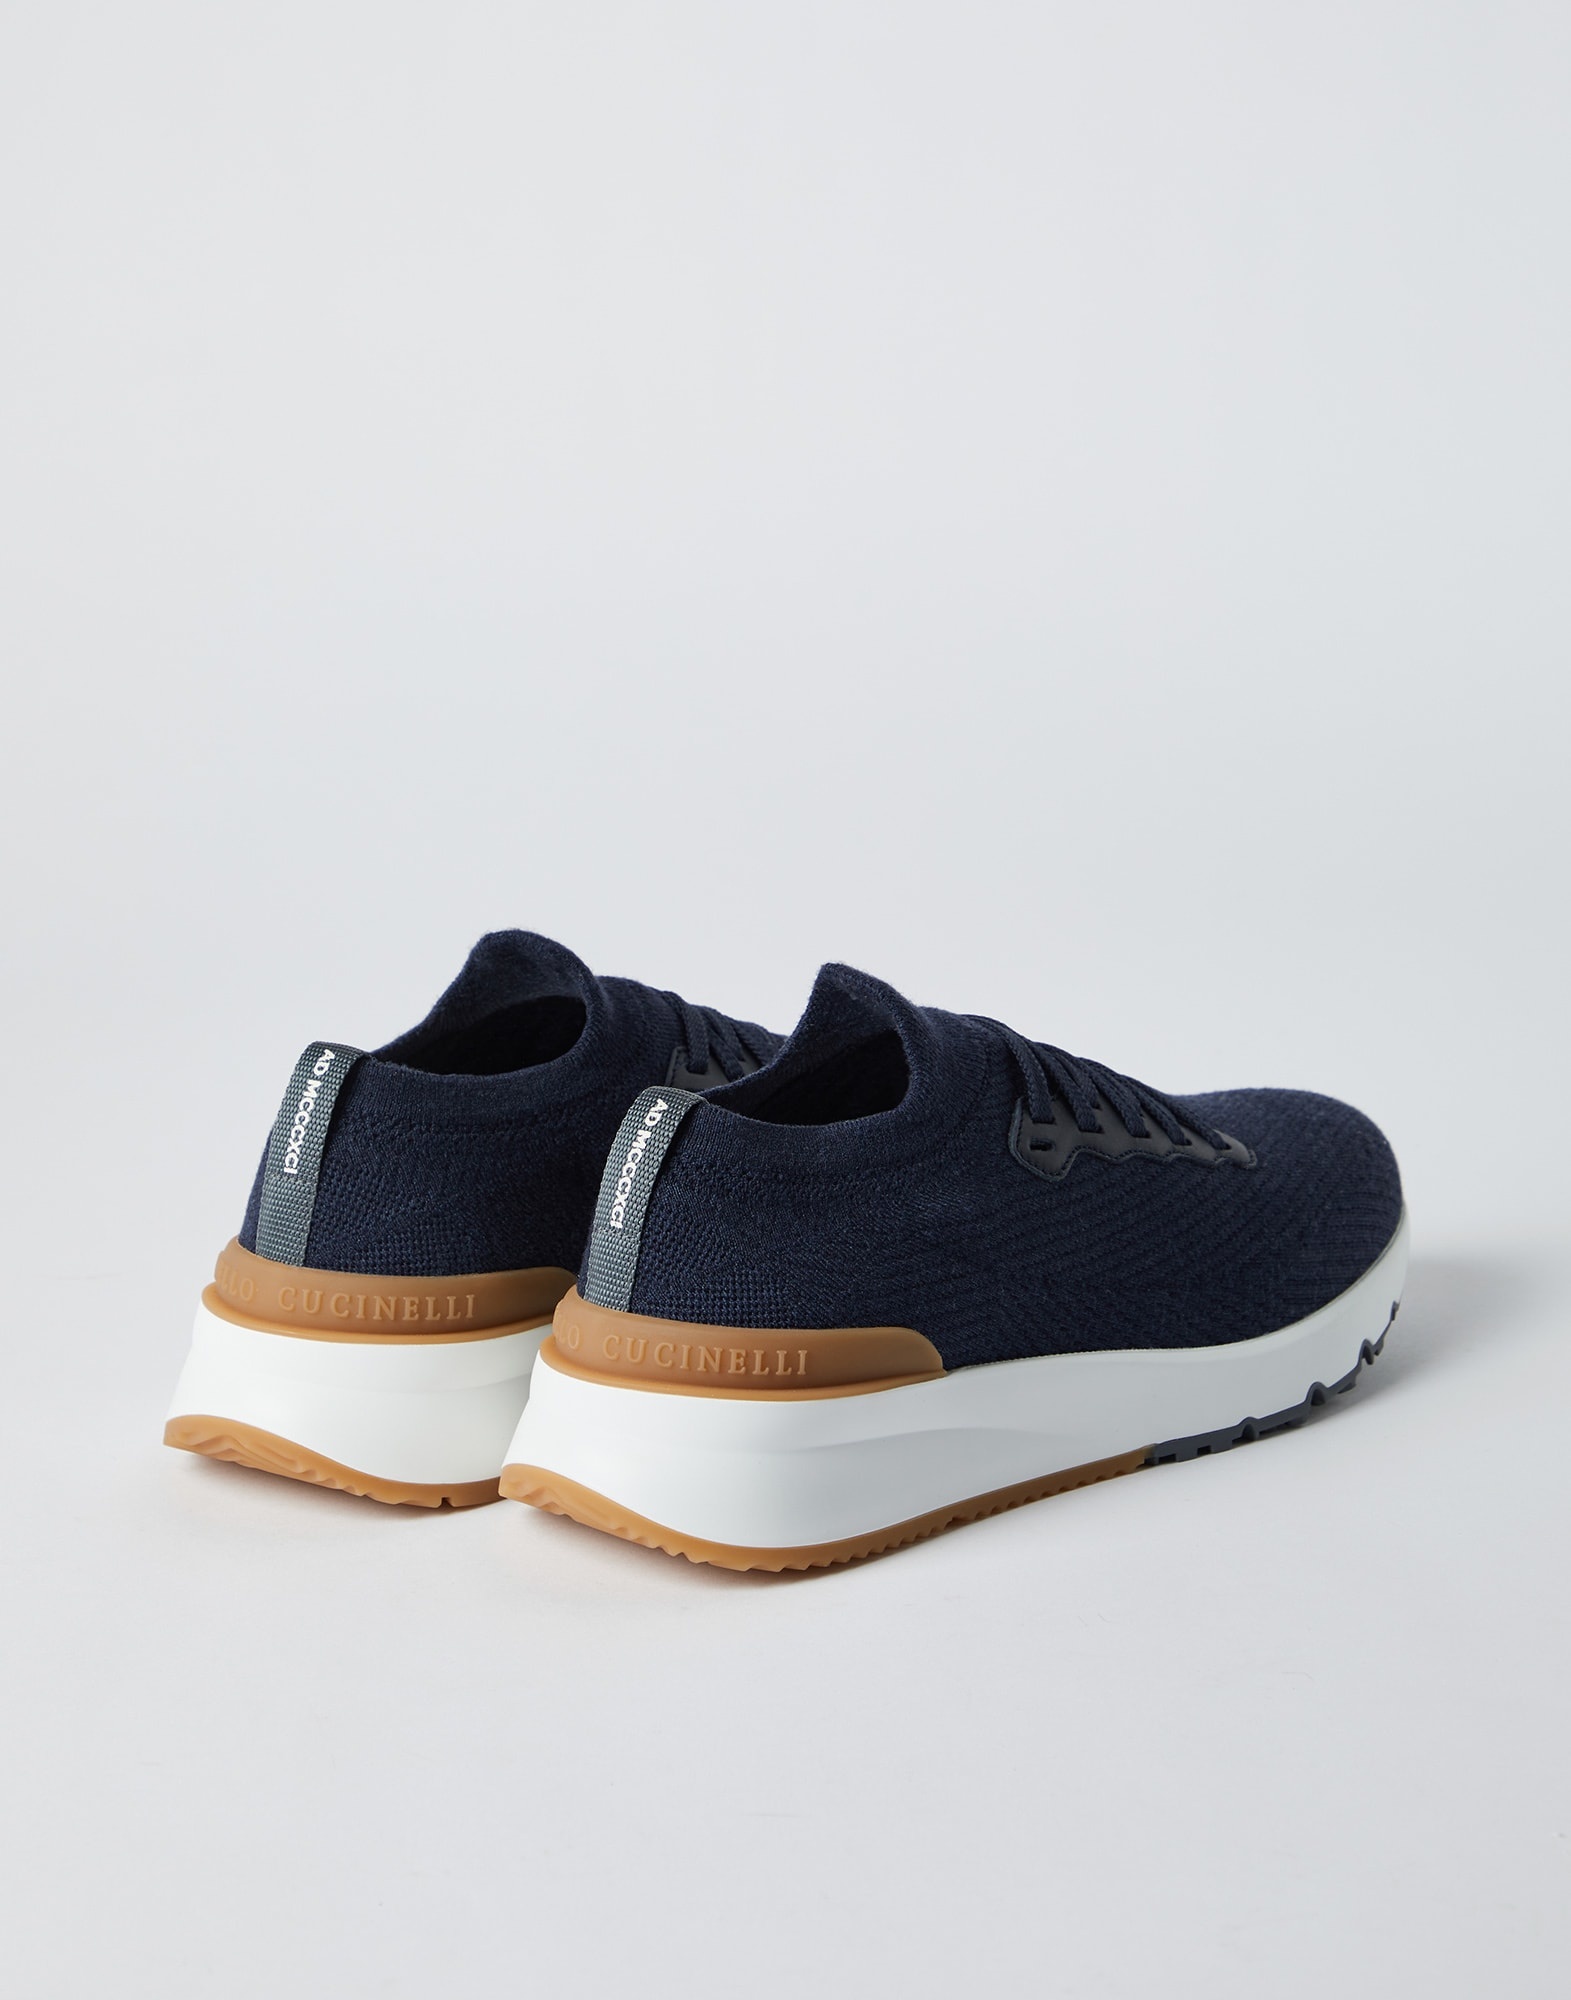 Wool knit and semi-polished calfskin runners with warm inner lining - 2